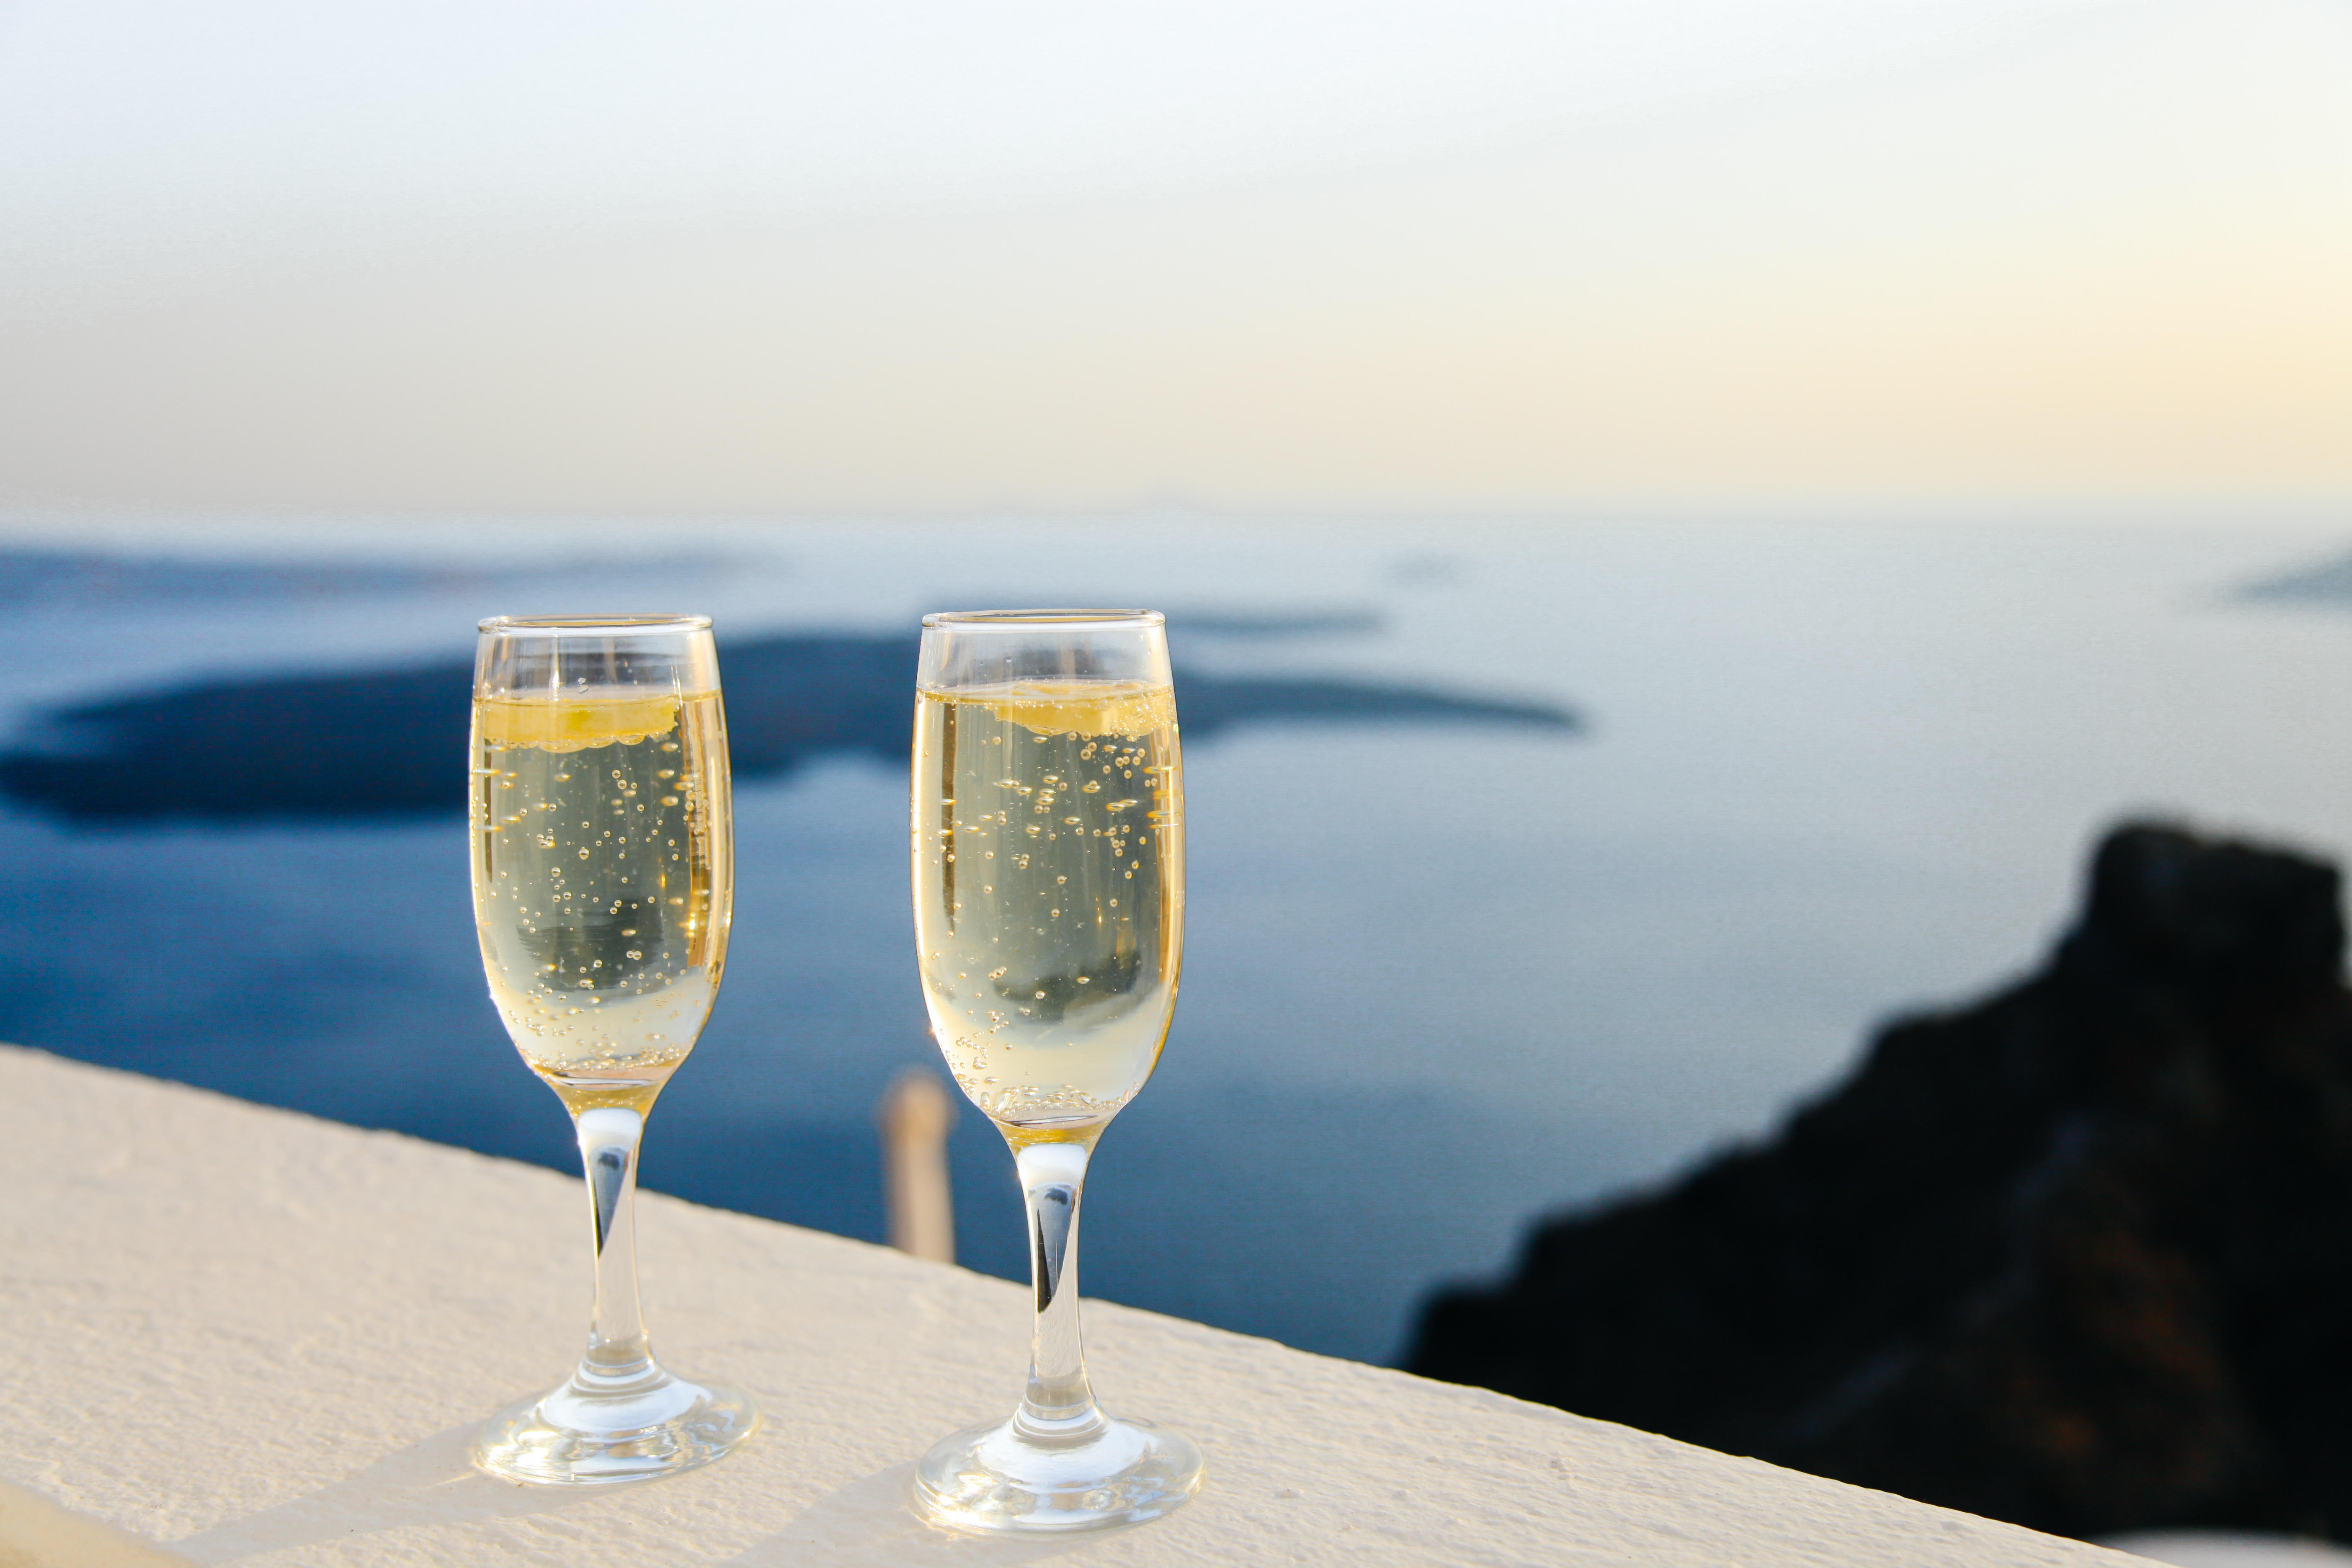 Two glasses of champagne to enjoy on a Valentine's Day getaway.